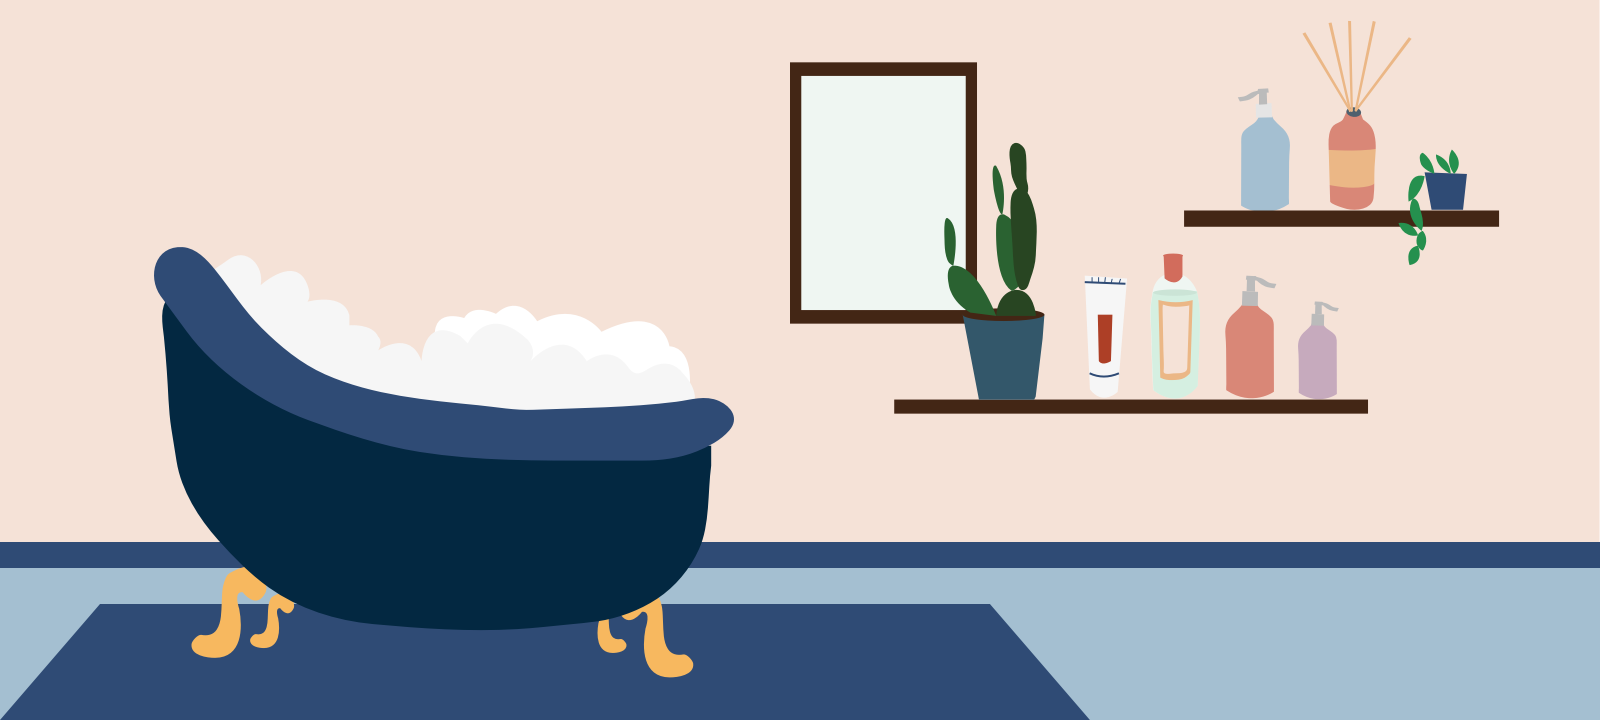 How to get better sleep: A warm, relaxing bubble bath as part of a wind-down routine.